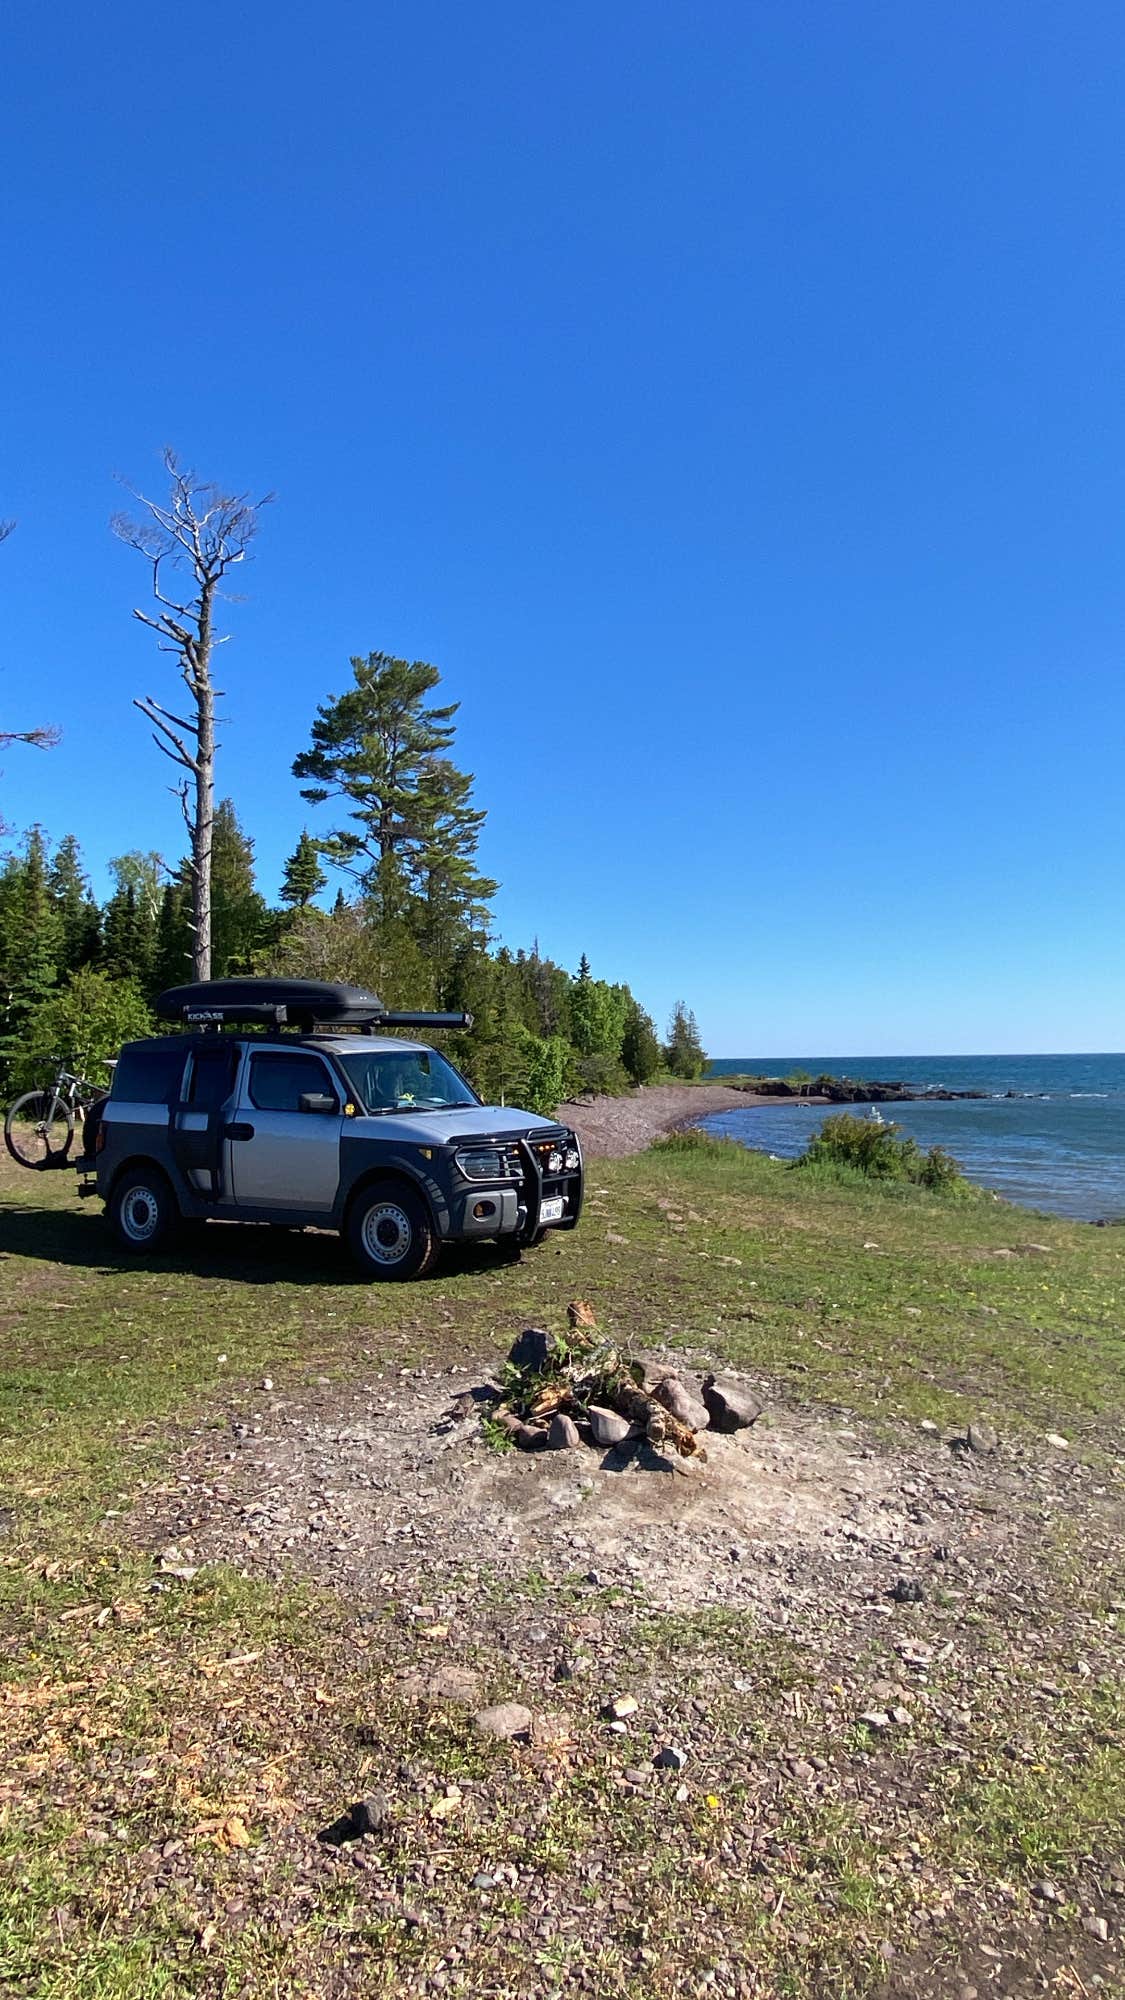 Camper submitted image from Keweenaw Peninsula High Rock Bay - 4